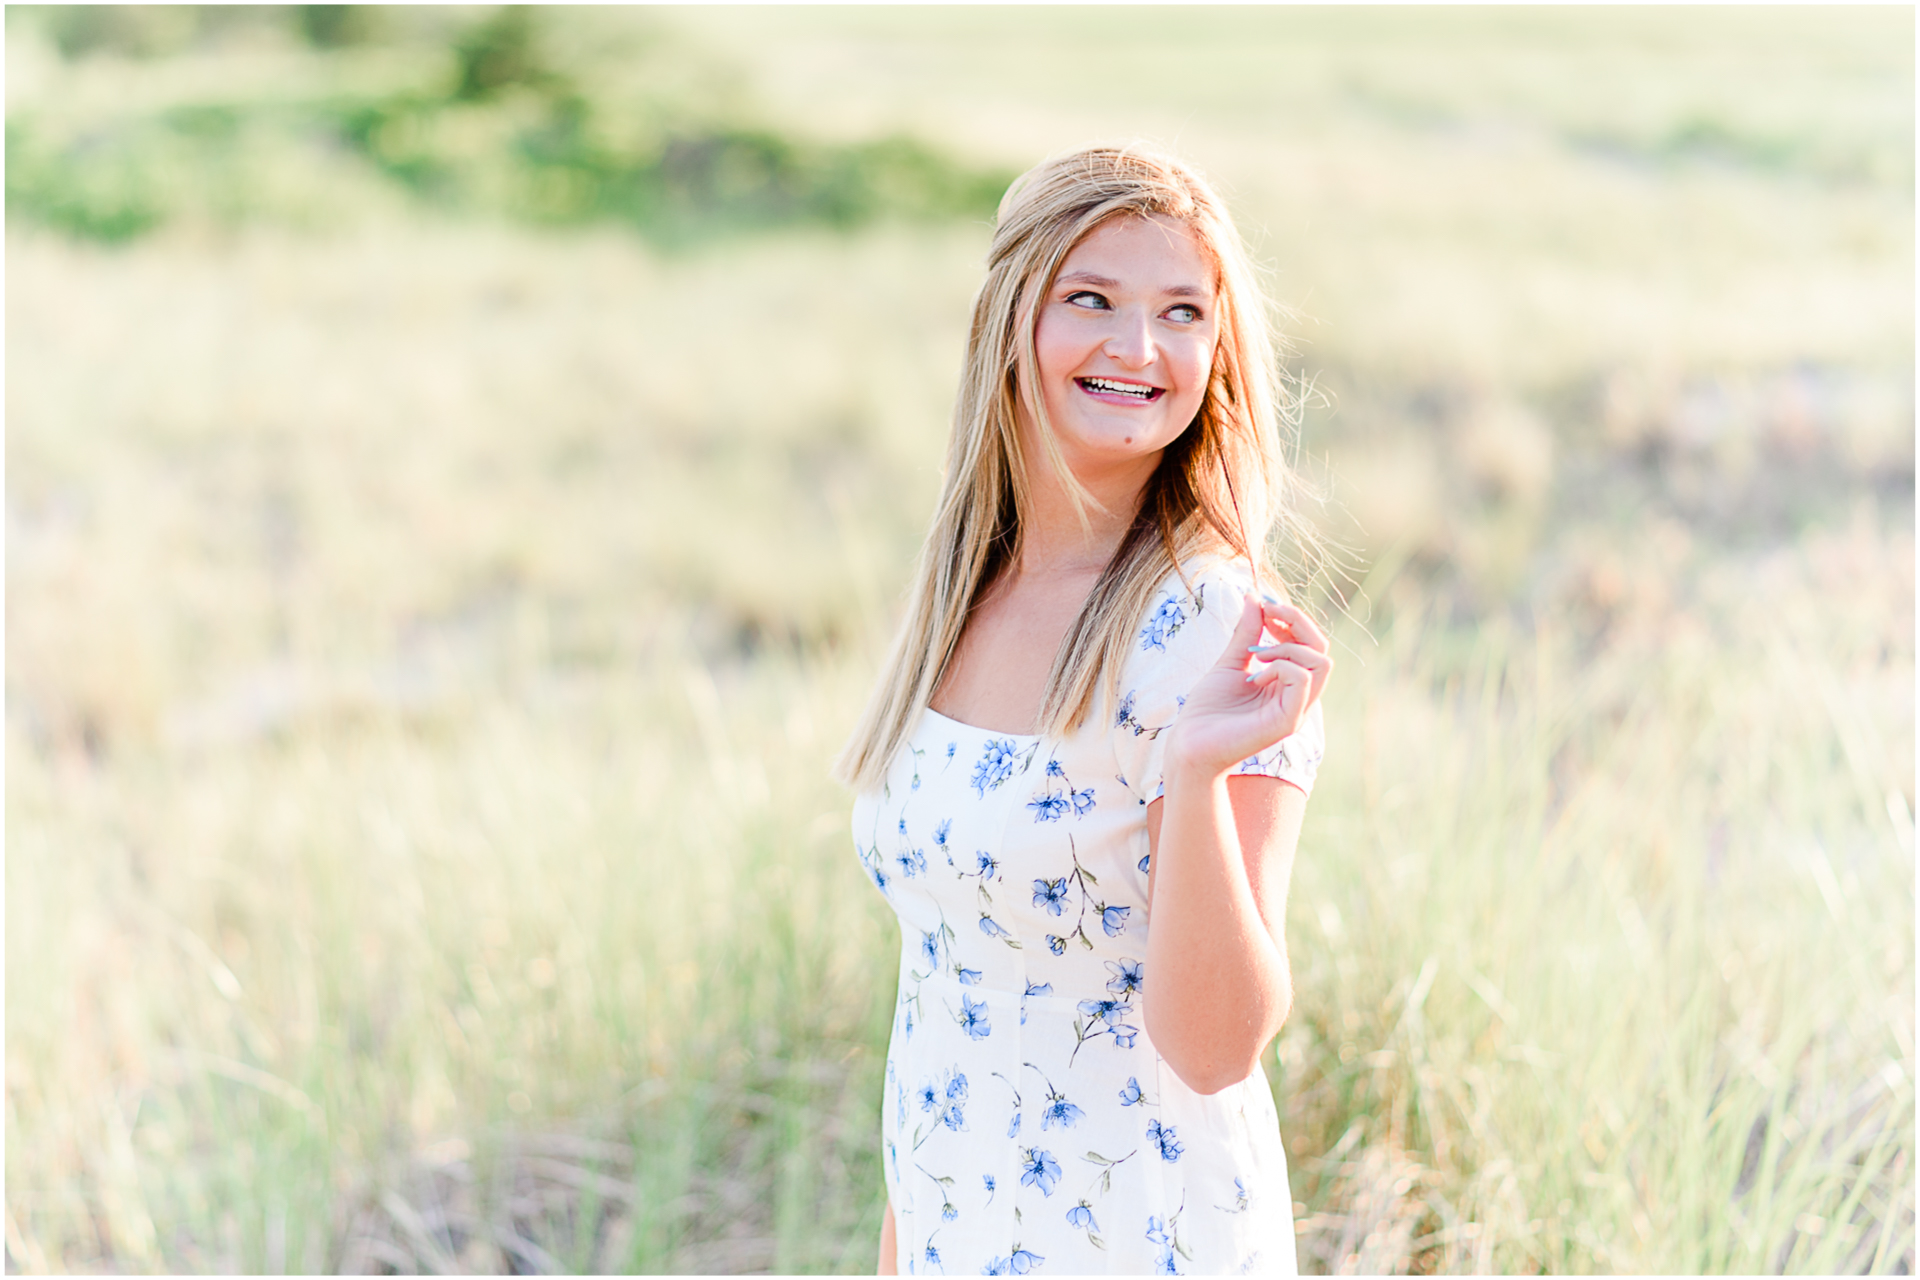 Photo by Marshfield senior portrait photographer Christina Runnals | High school girl wearing a white dress and laughing